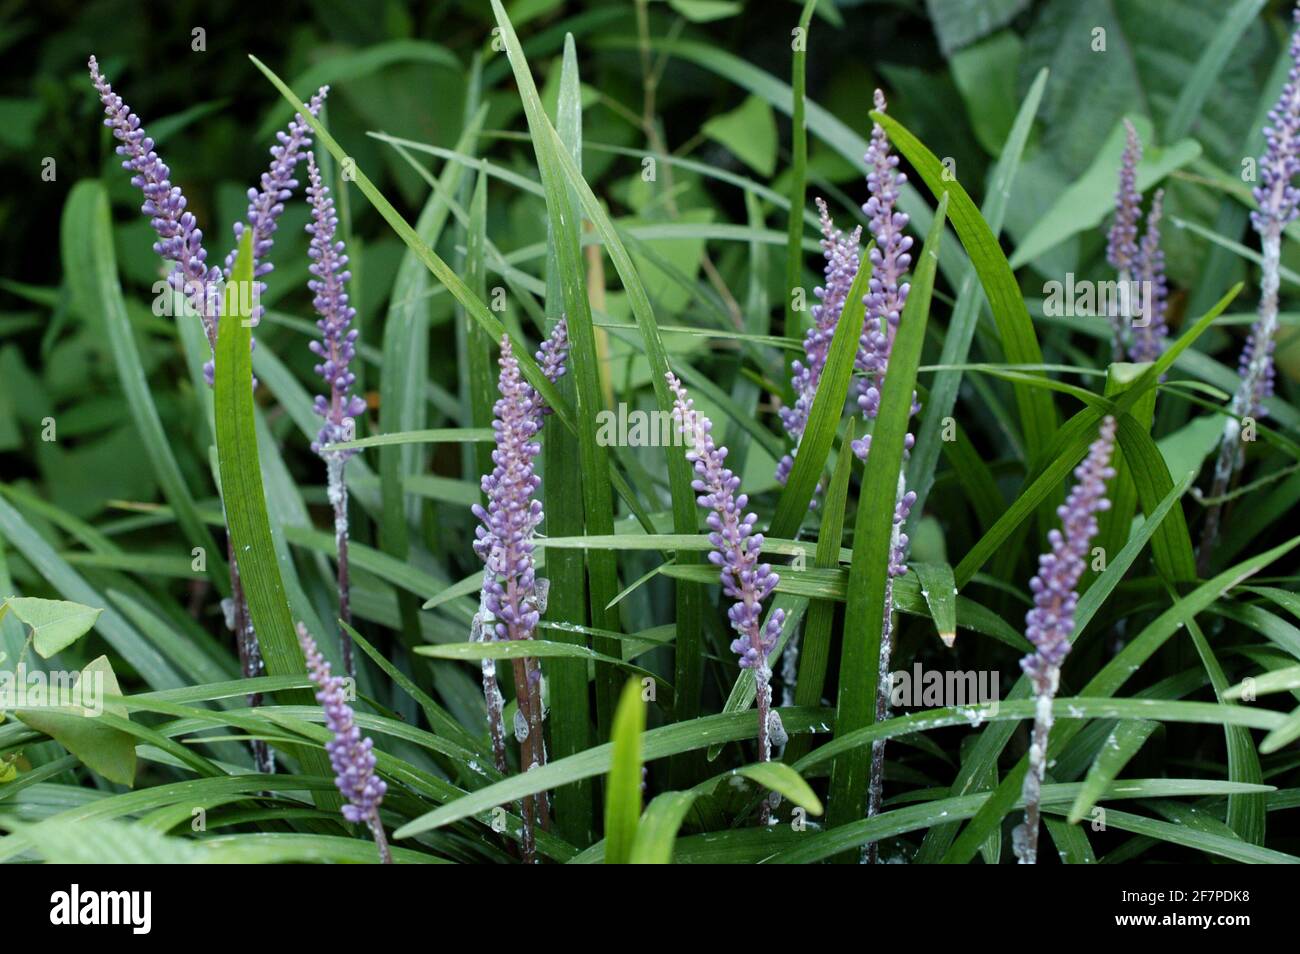 Liriope platyphylla with pretty green leaves and purple flowers Stock Photo